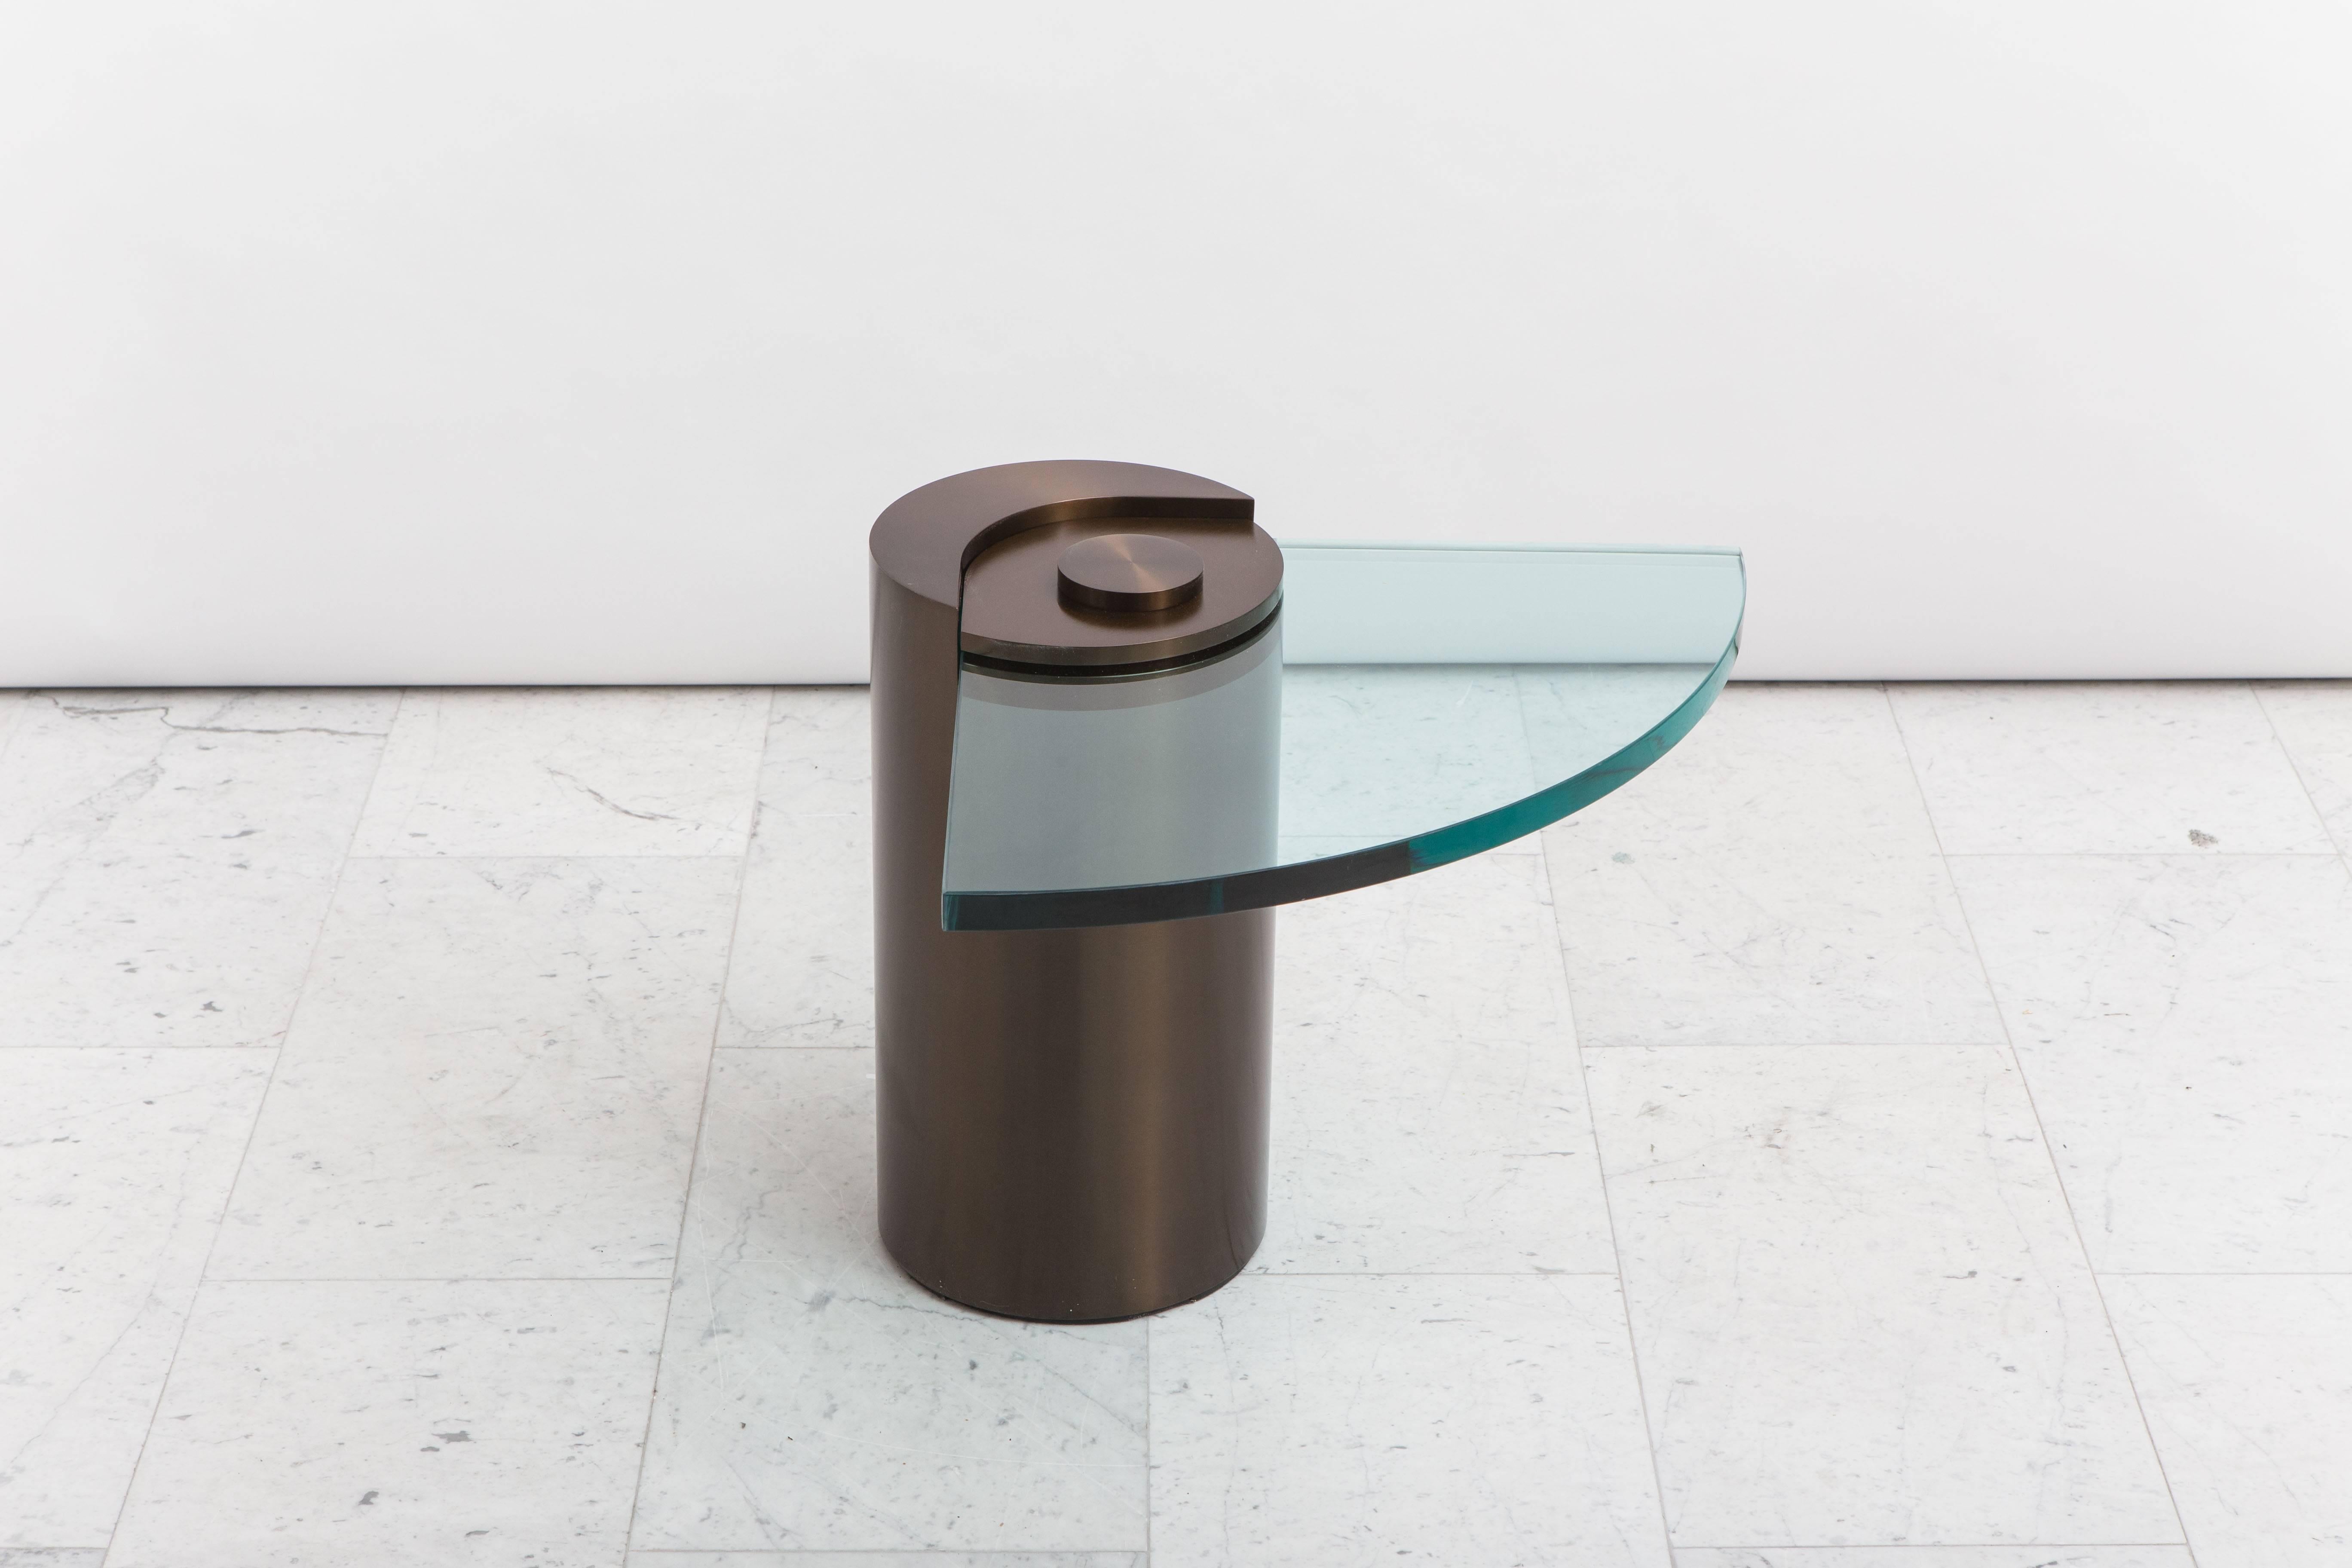 An iconic design by Karl Springer, the unique sculpture leg table debuted in 1971 and is being reissued today exclusively with Todd Merrill Studio. Featuring a cylindrical metal base in royal bronze, an elegant cantilevered fan-shaped glass extends